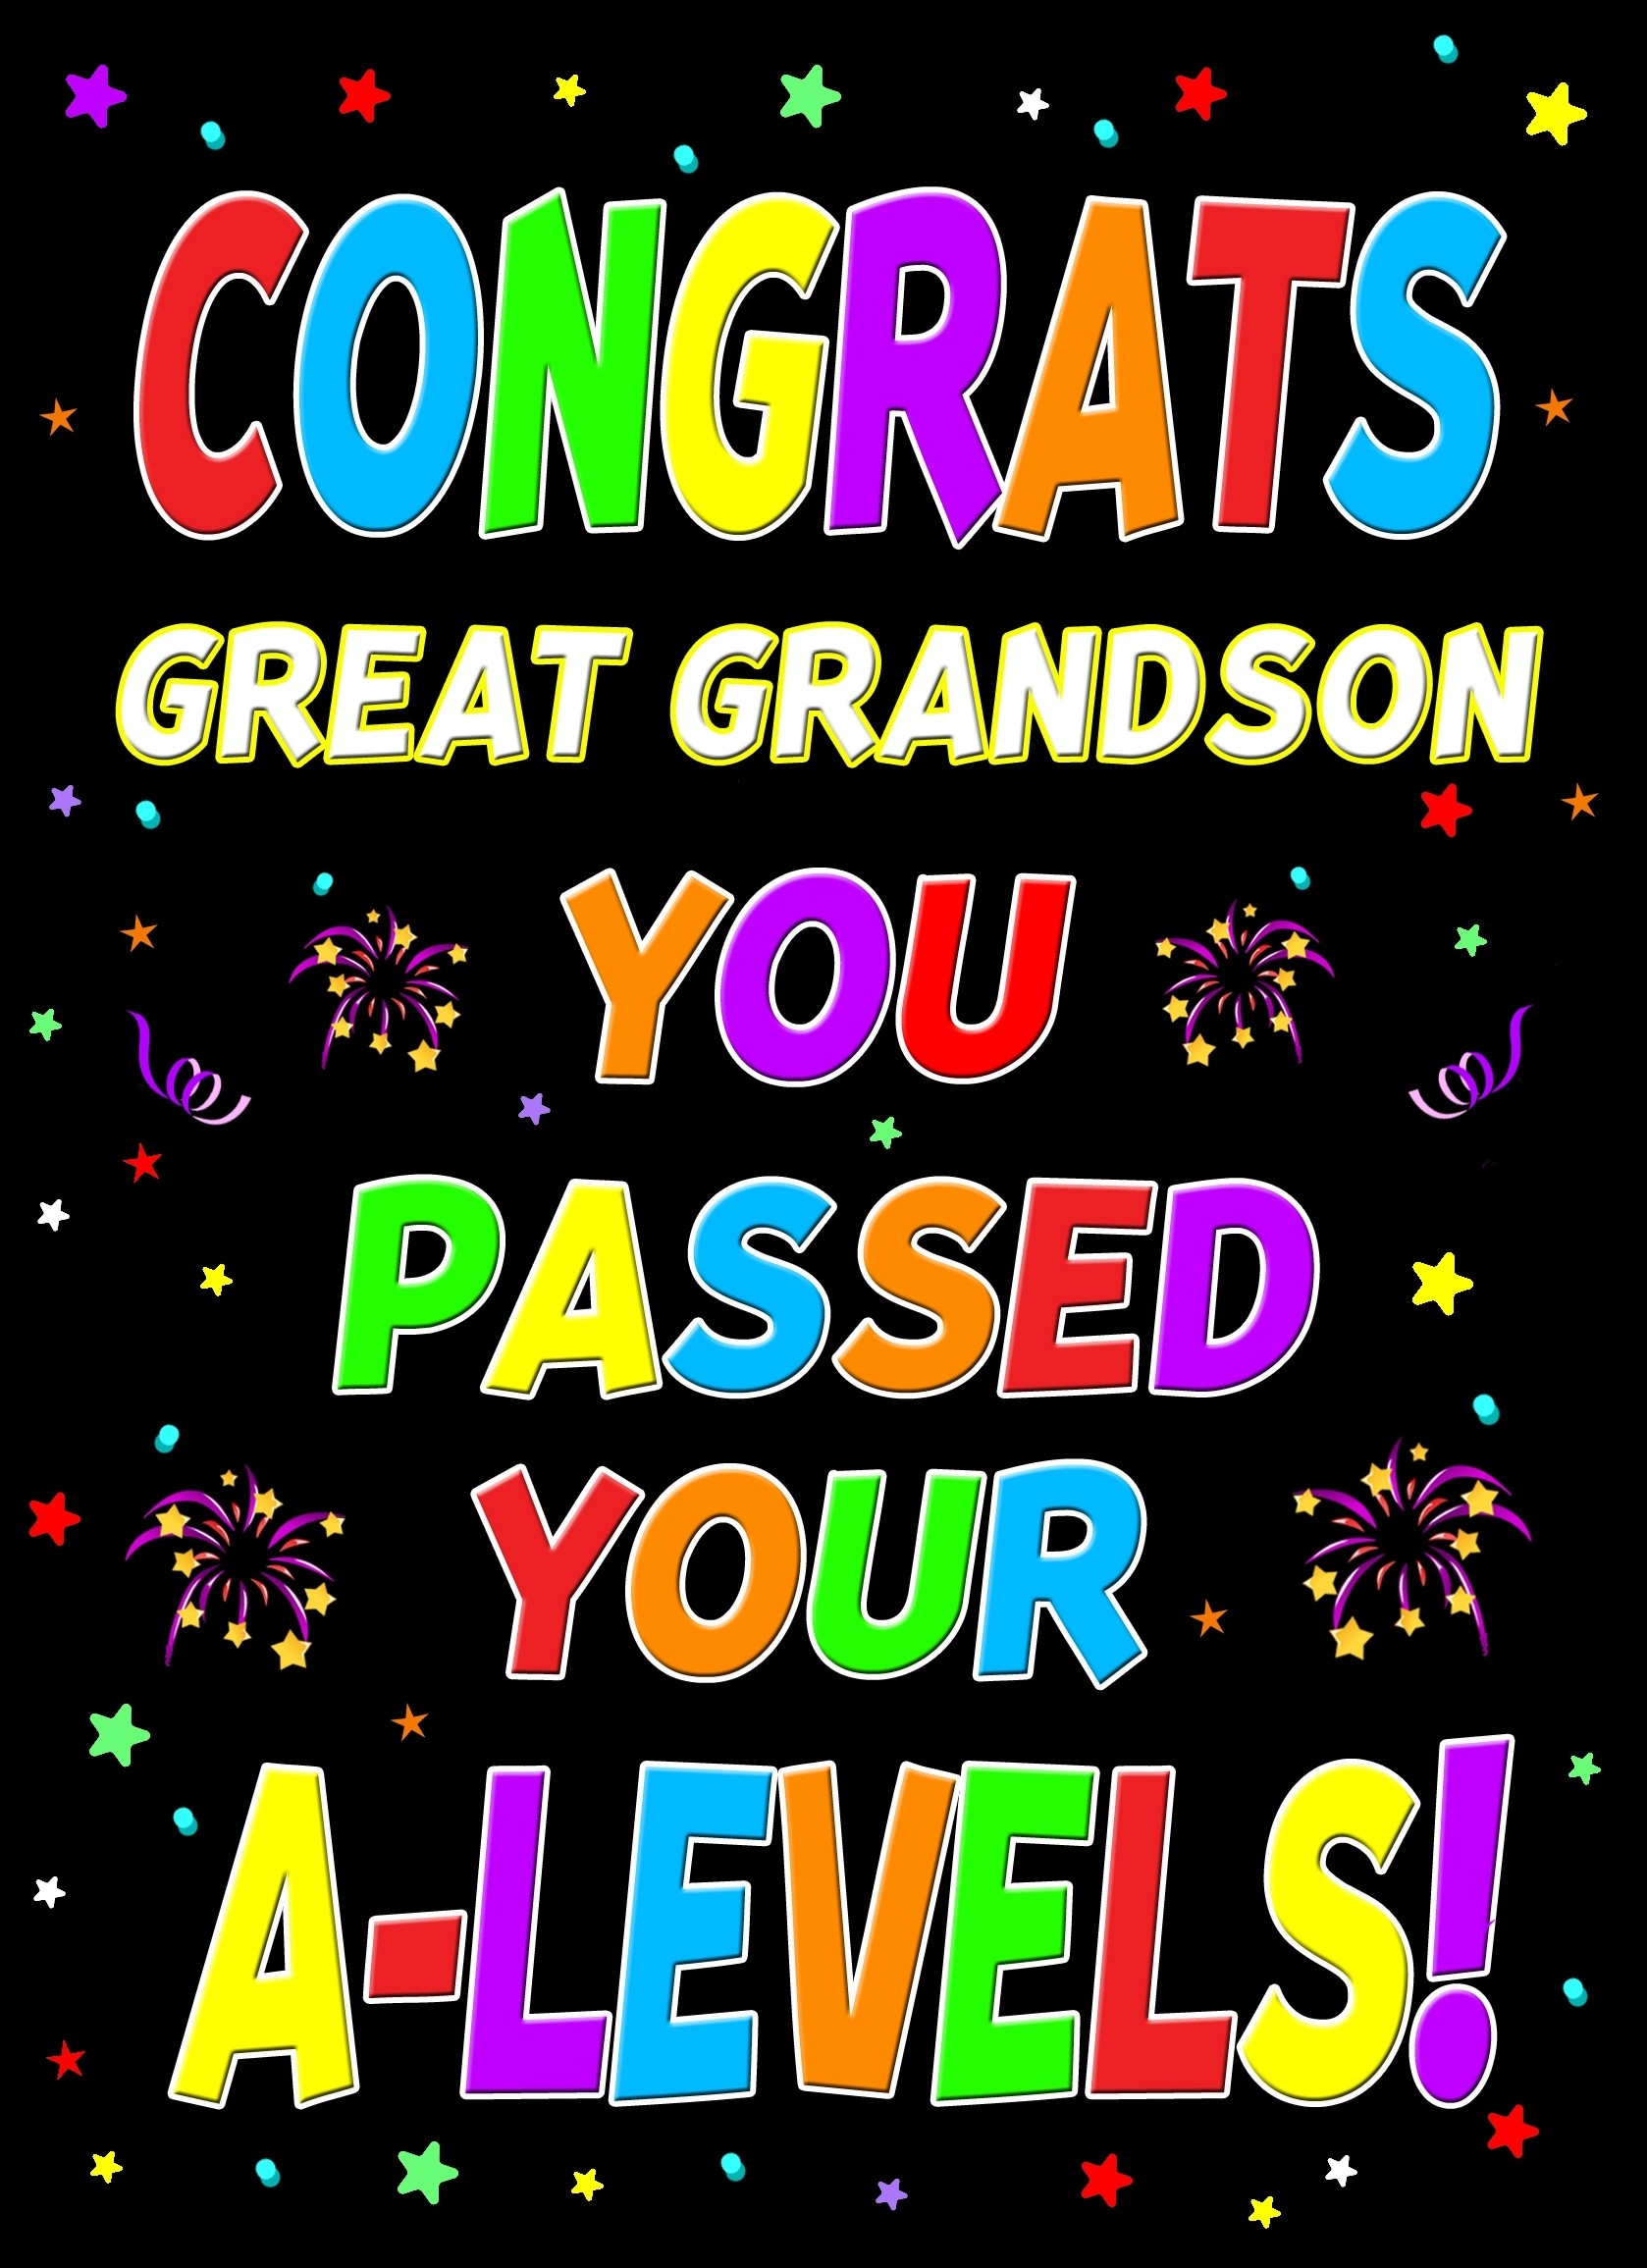 Congratulations A Levels Passing Exams Card For Great Grandson (Design 1)